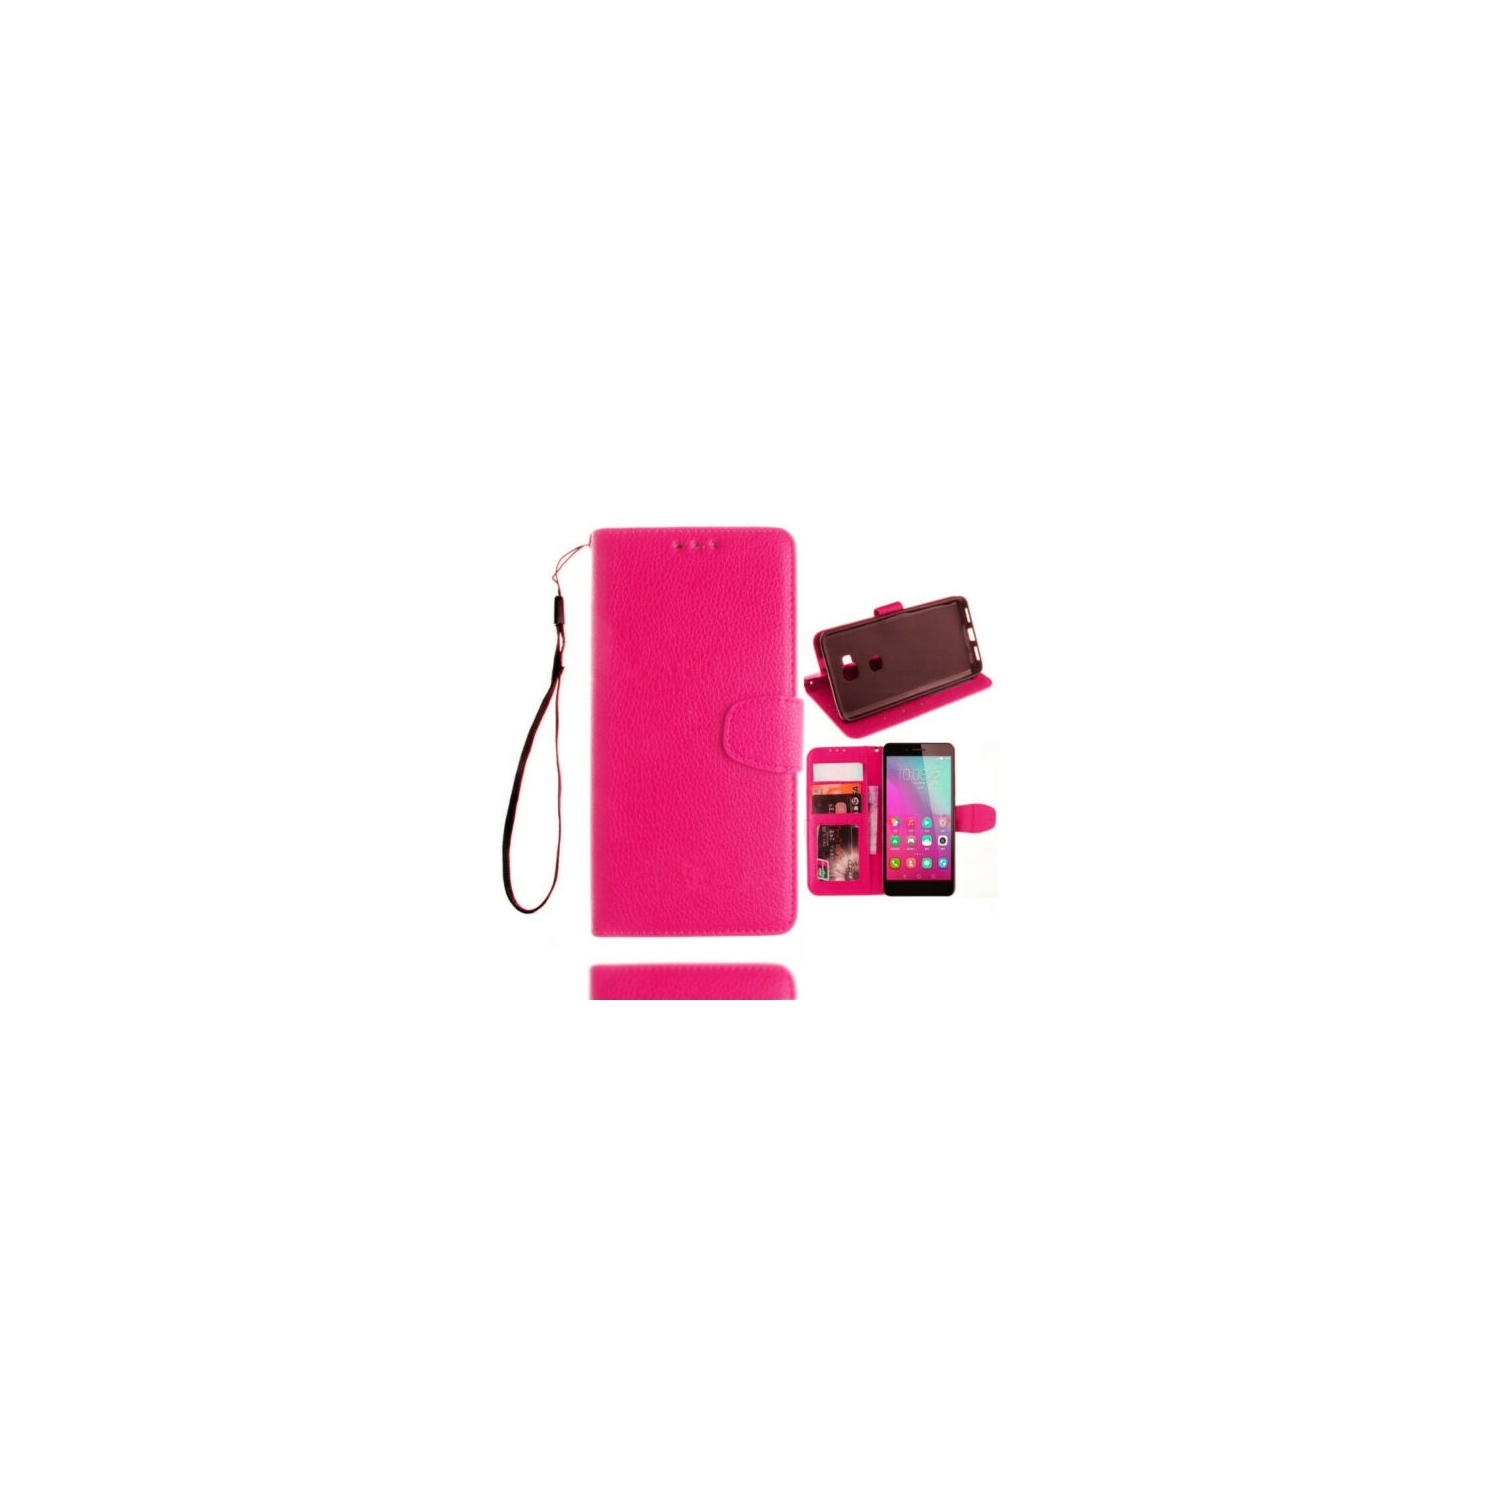 【CSmart】 Magnetic Card Slot Leather Folio Wallet Flip Case Cover for Huawei GR5 & Honor 5x, Hot Pink